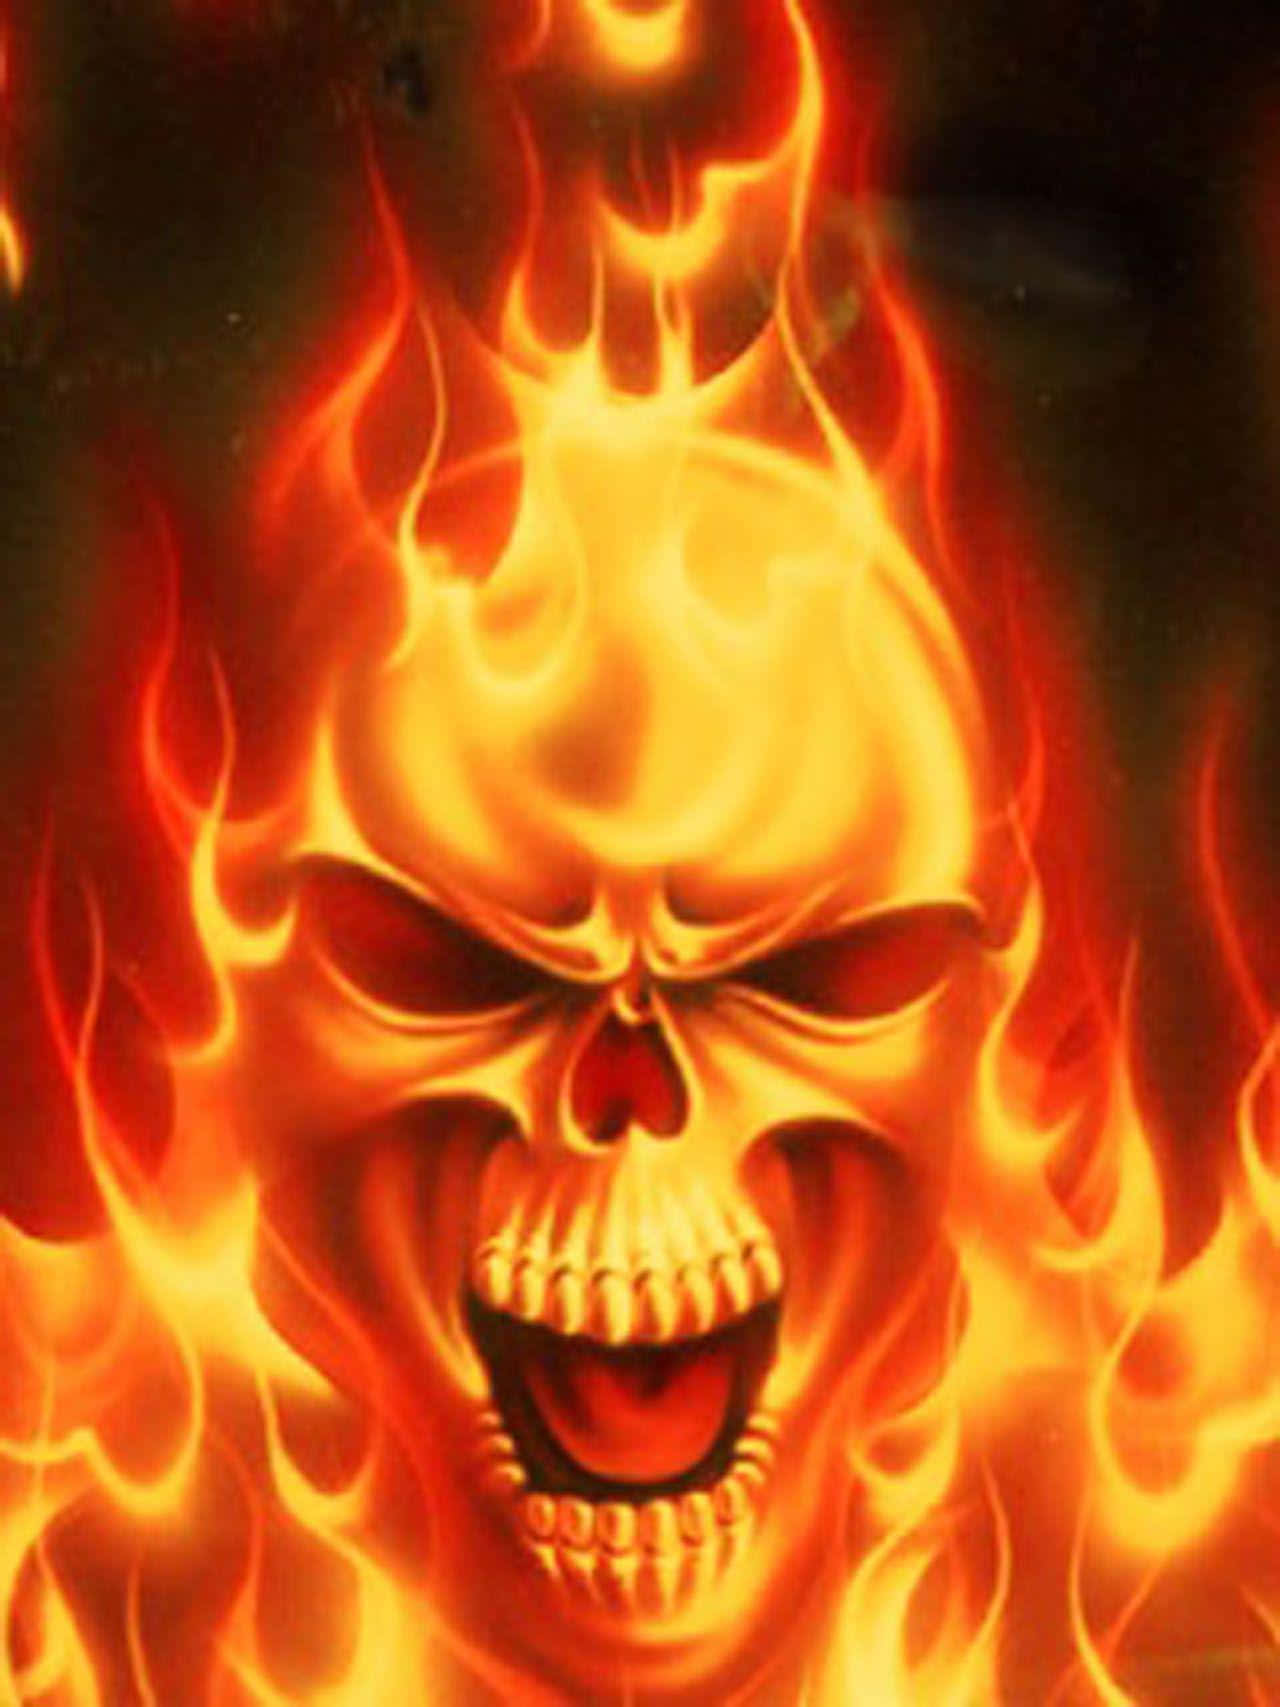 Feel the fiery intensity of a Red Flame Skull Wallpaper